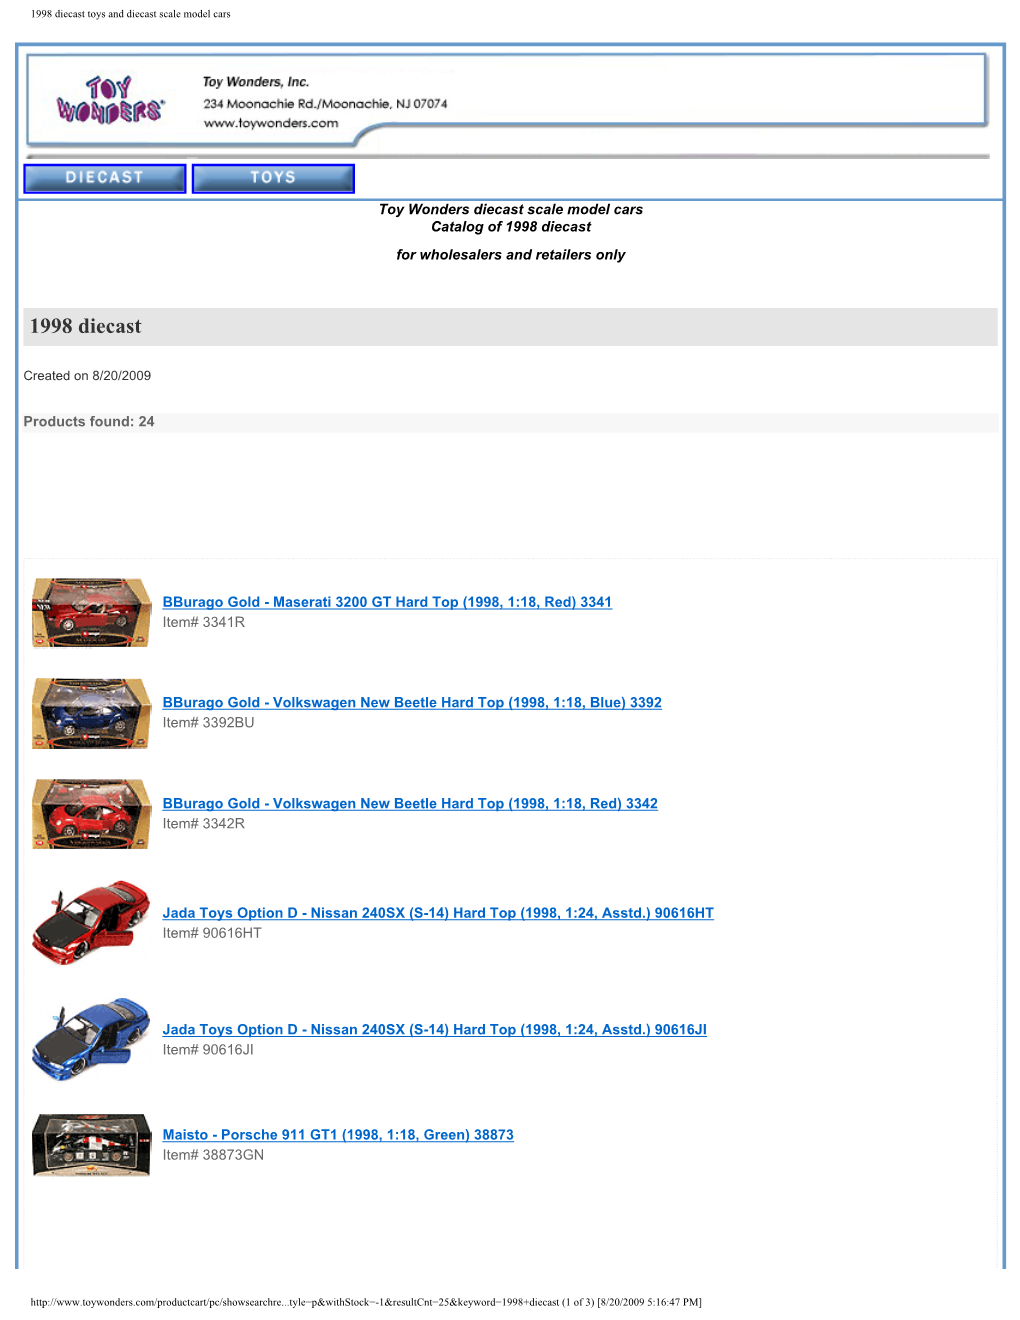 1998 Diecast Toys and Diecast Scale Model Cars